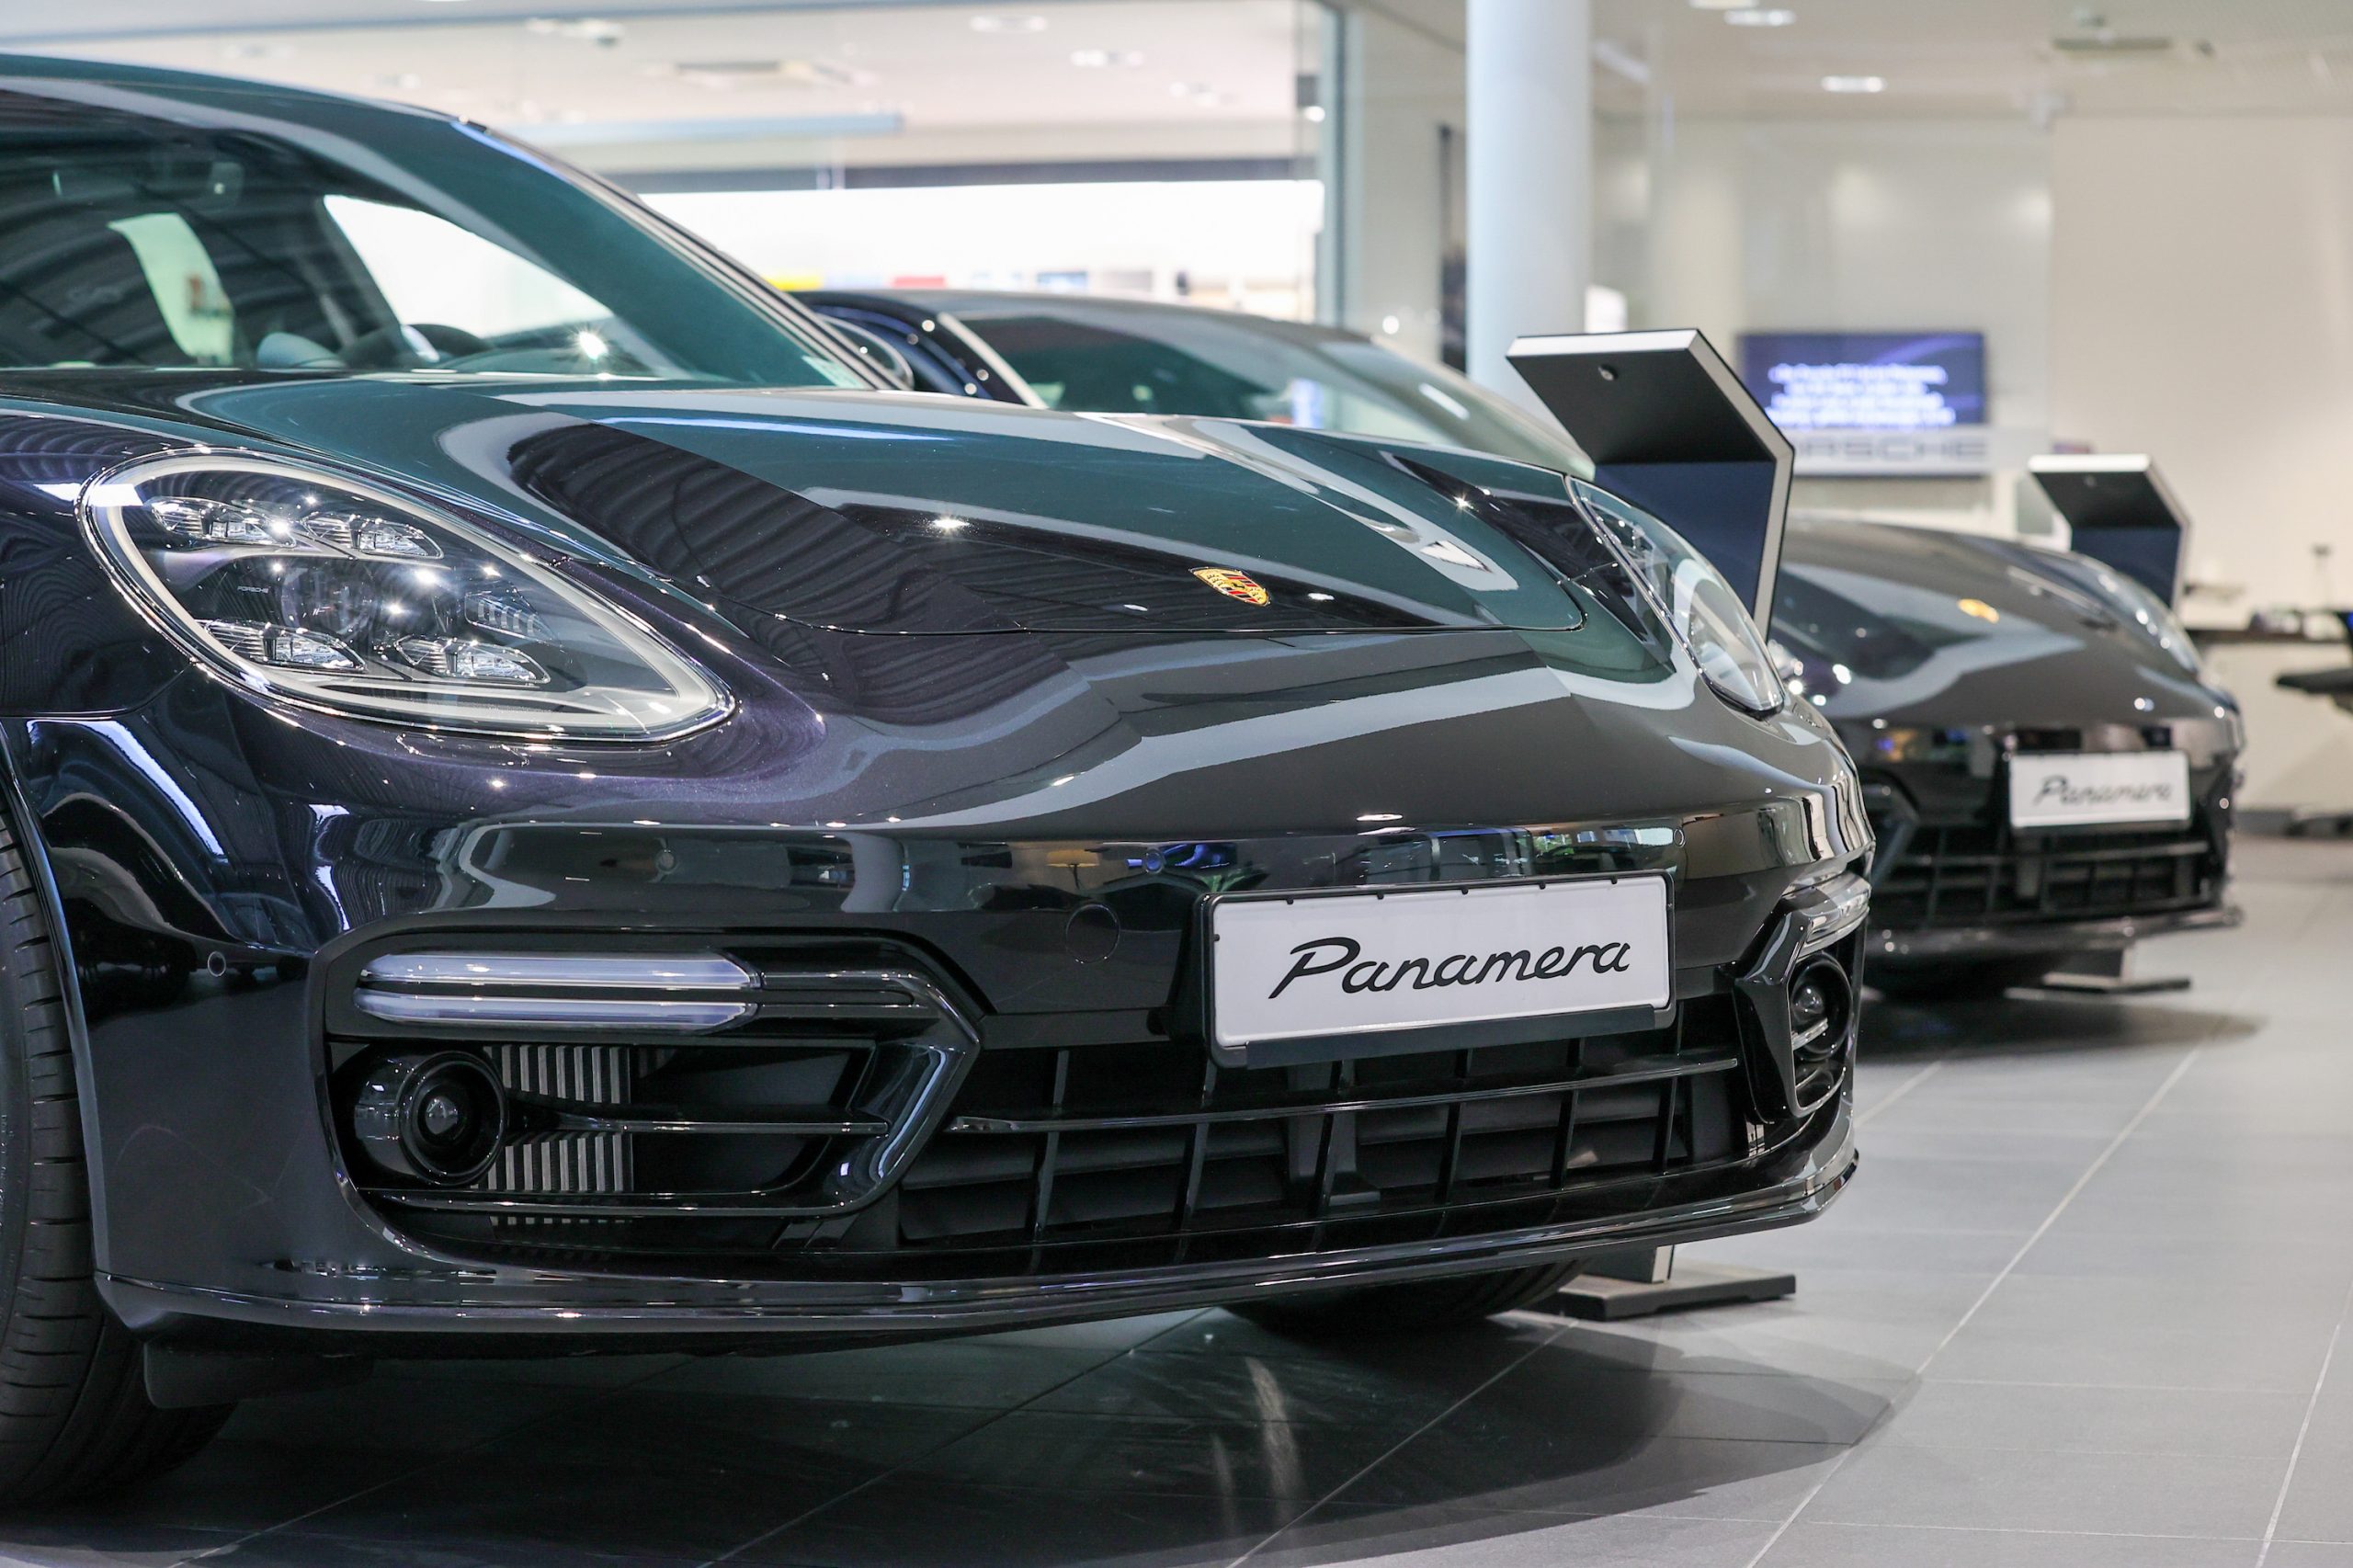 Panamera luxury automobiles, manufactured by Porsche SE, sit on display in the showroom at the Porsche Automobil Holding SE center in Hamburg, Germany